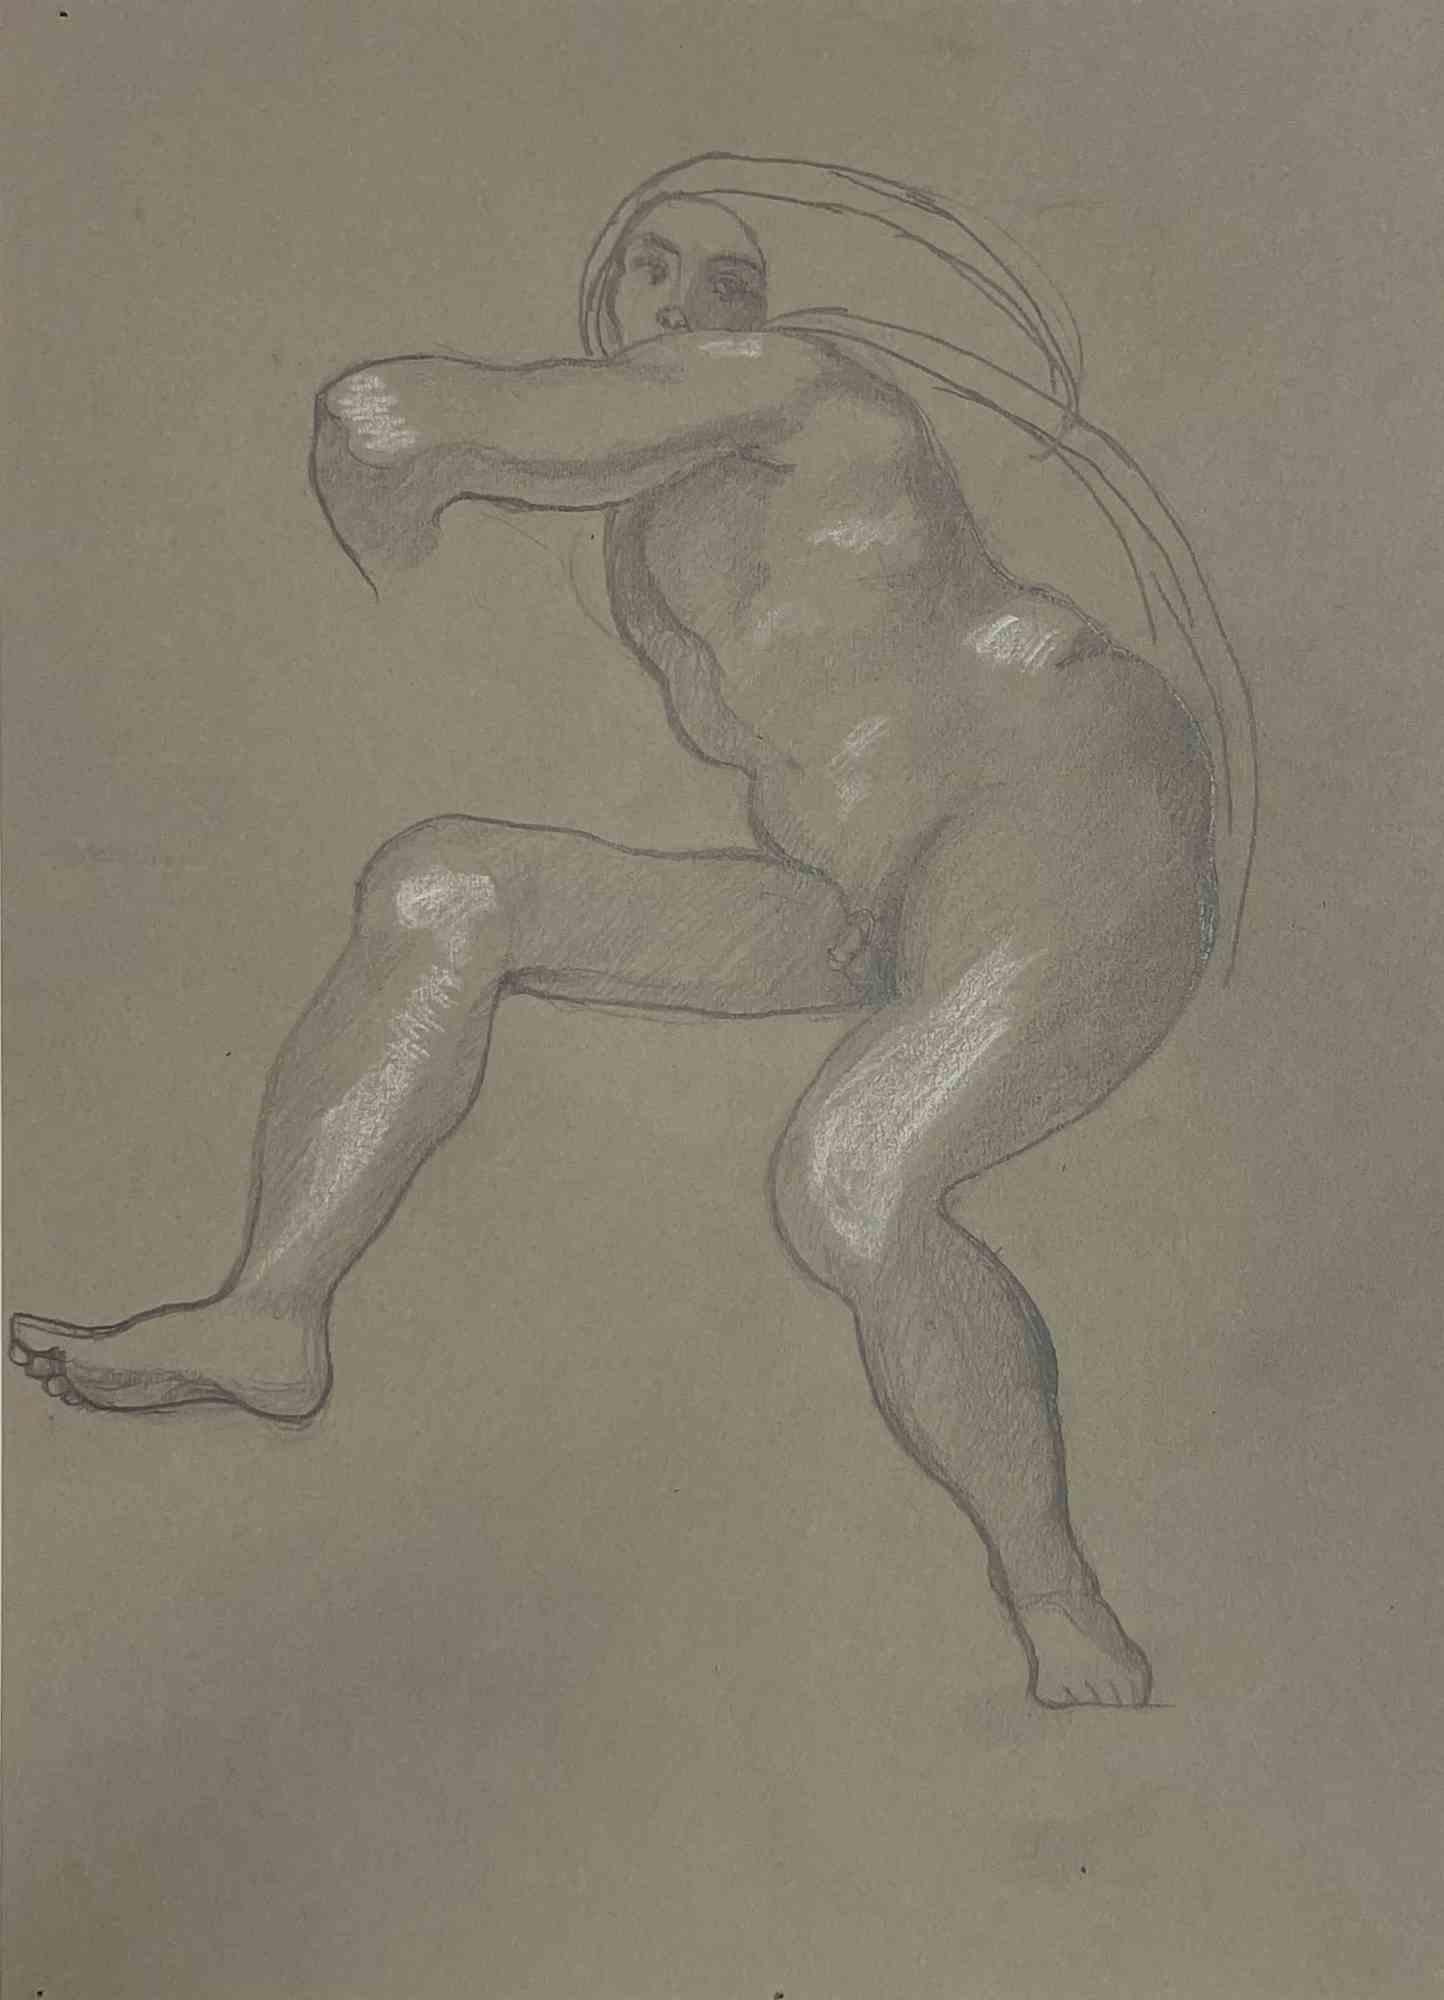 Nude after  Michelangelo is an artwork realized by Luigi Russolo, 1933/34.

Mixed Media on Paper.

Good conditions.

Luigi Carlo Filippo Russolo (Portogruaro, 30 April 1885 - Laveno-Mombello, 4 February 1947) was an Italian composer, painter and